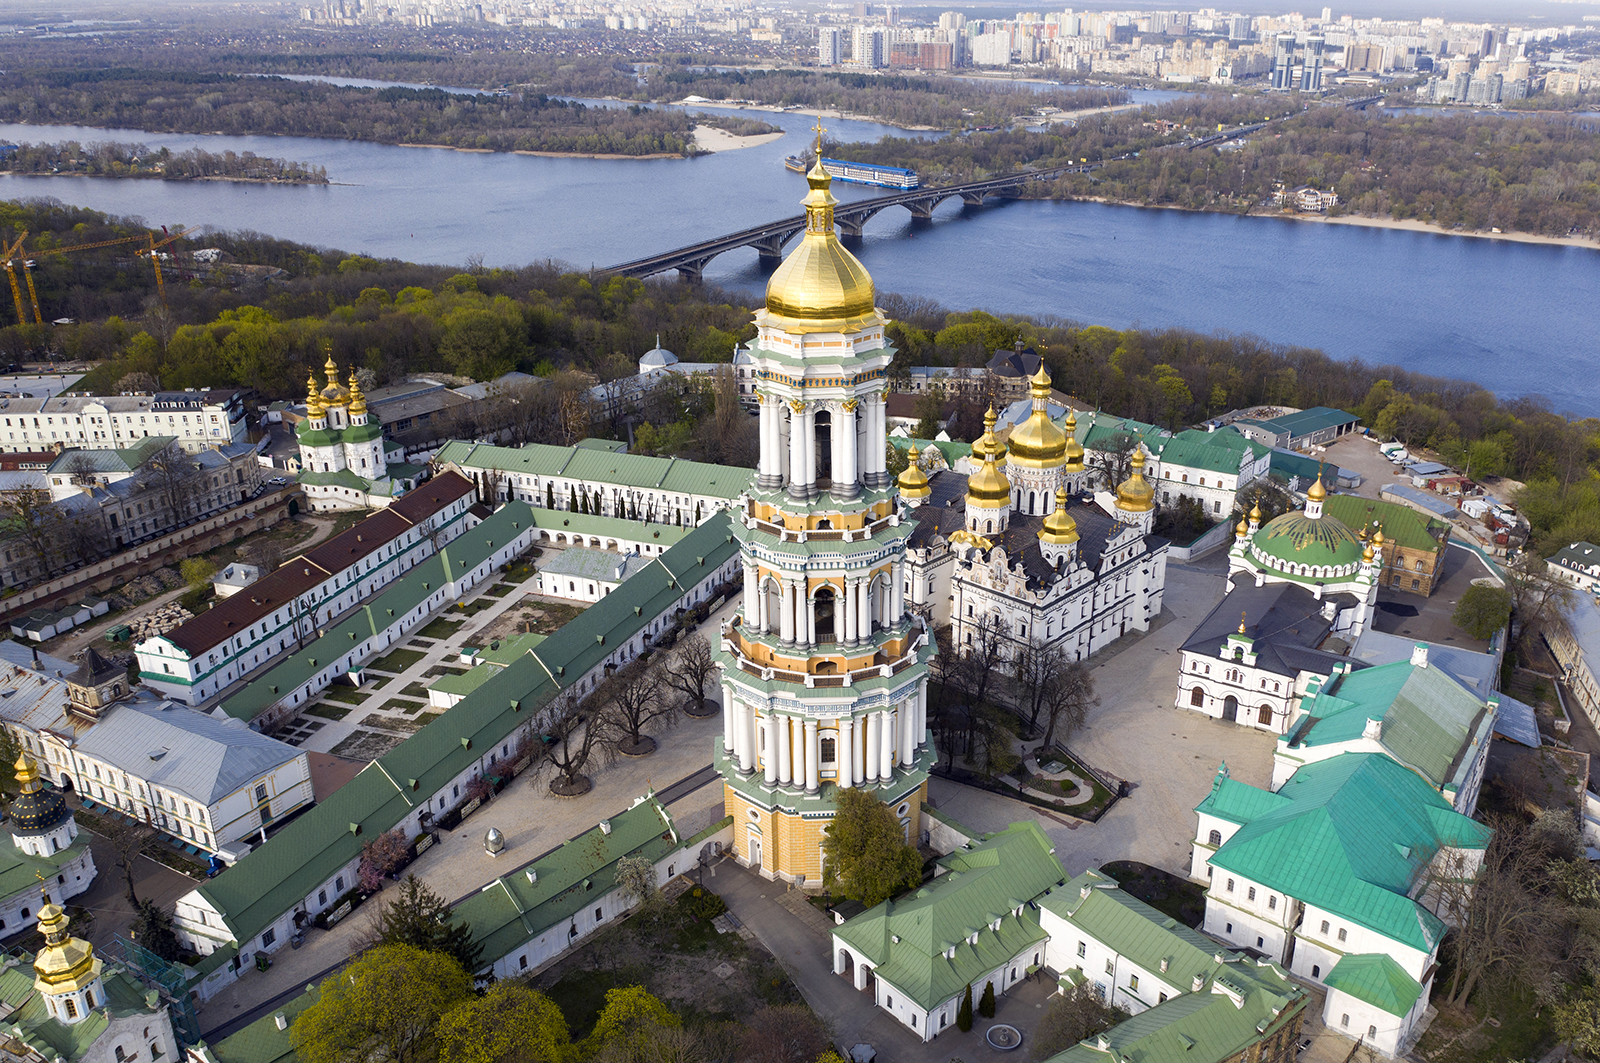 An aerial view of the ancient Kiev Monastery of the Caves, which is closed for coronavirus quarantine, in Kiev, Ukraine, Monday, April 13, 2020. More than 90 COVID-19 cases have been confirmed at the monastery, of which 63 were monks, making the thousand-year old historical and religious center the biggest hotbed of coronavirus outbreaks in the Ukrainian capital. (AP Photo/Efrem Lukatsky)